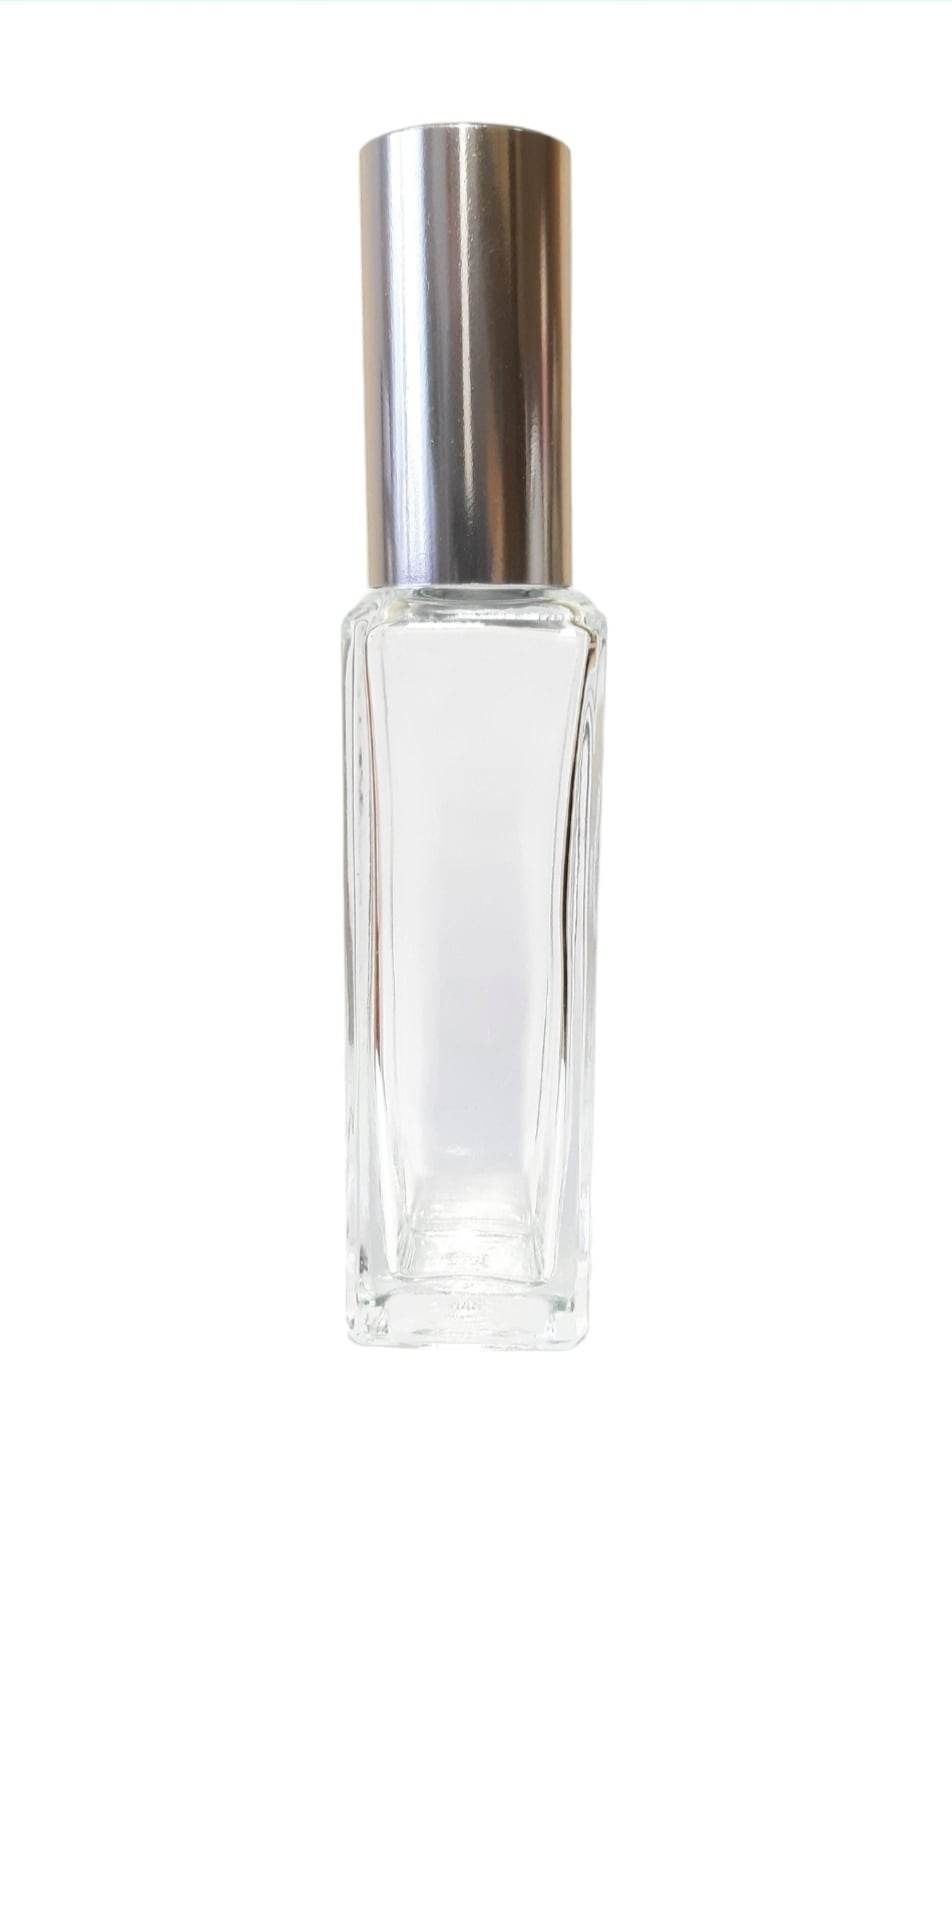 Armani Stronger With You 34ml